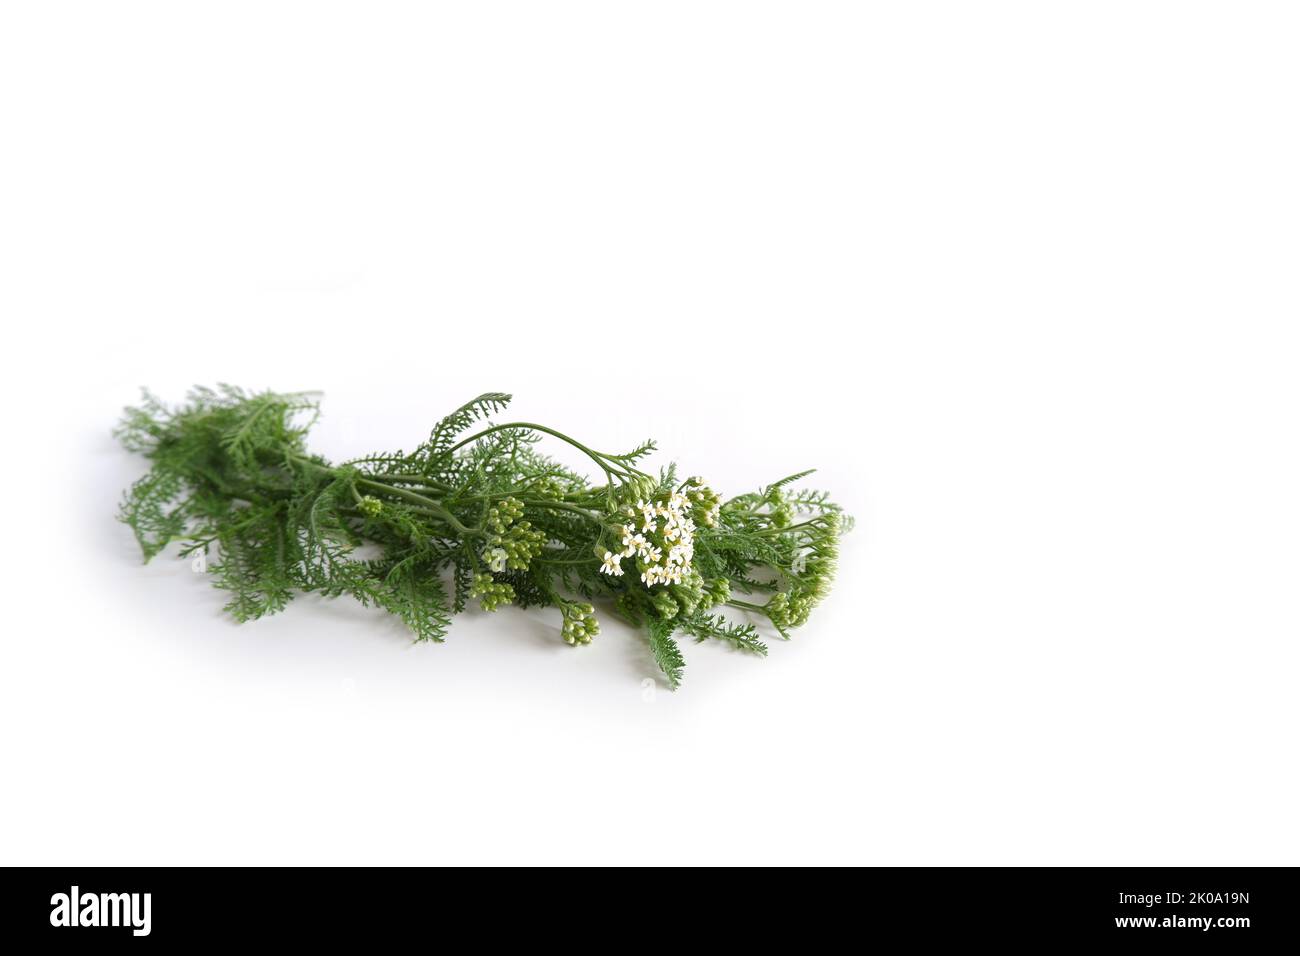 Medicinal plant yarrow with leaves, white flowers and buds on a white background. Stock Photo